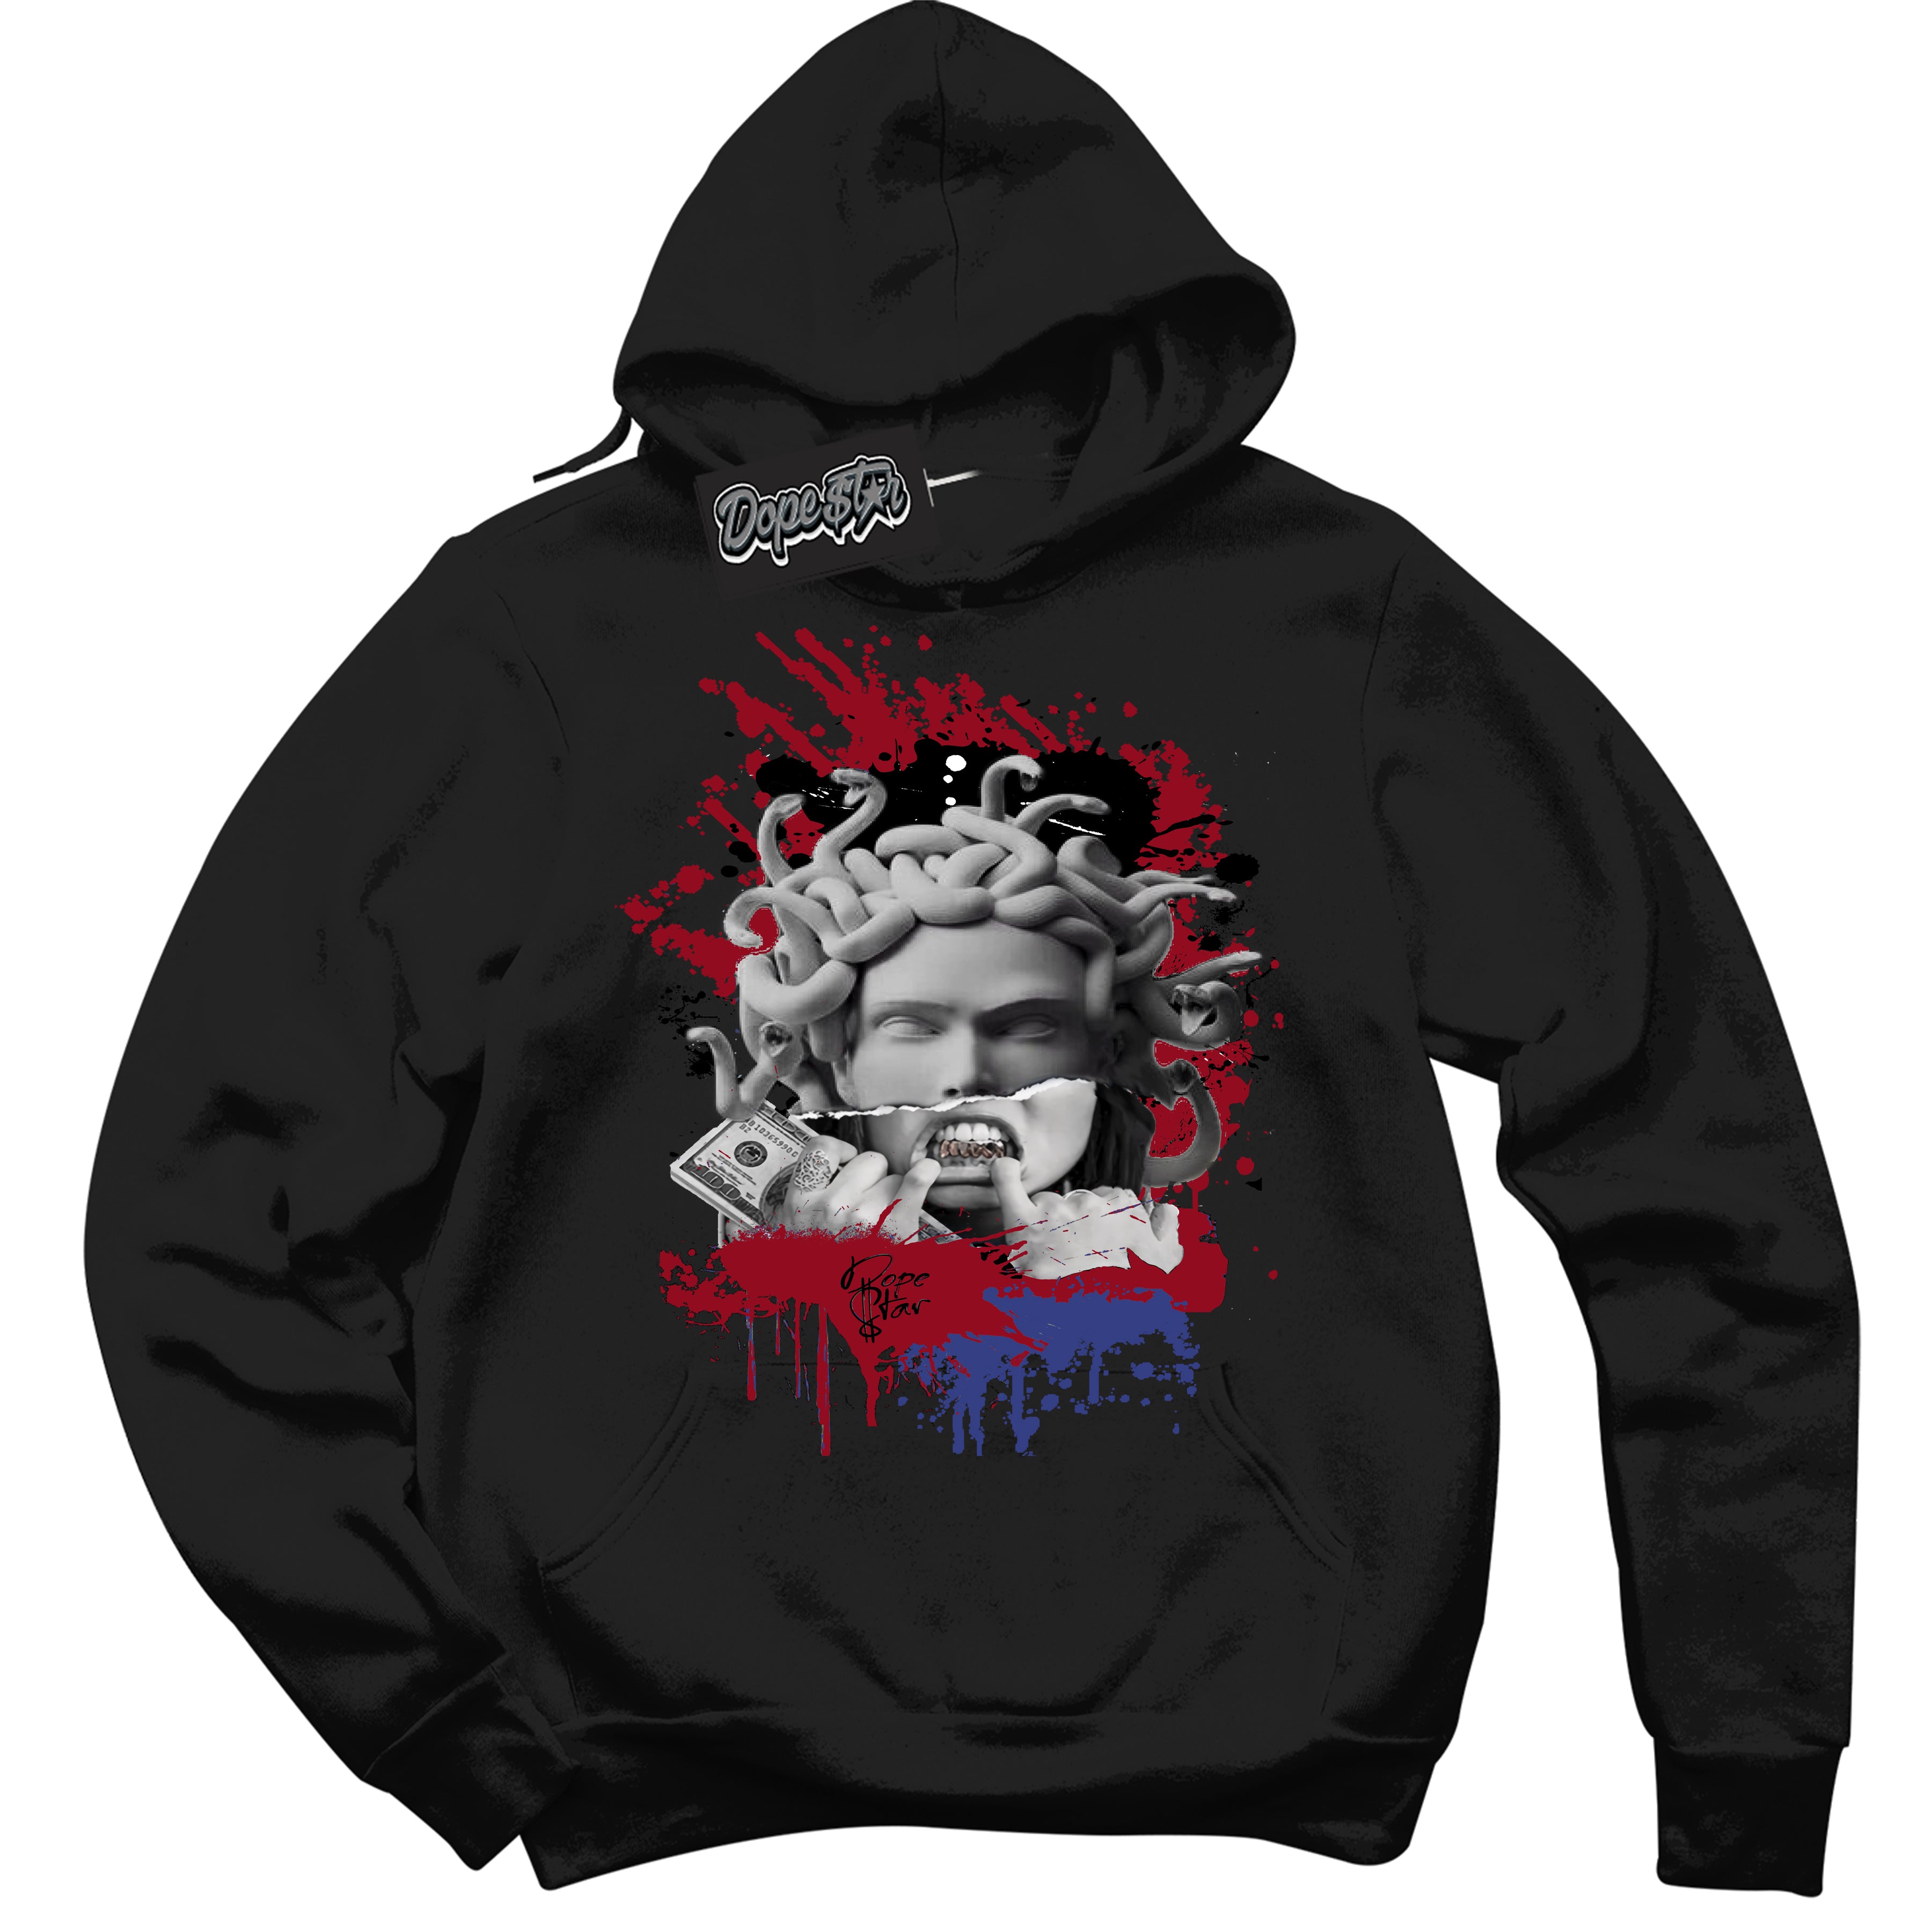 Cool Black Hoodie with “ Medusa ”  design that Perfectly Matches Playoffs 8s Sneakers.